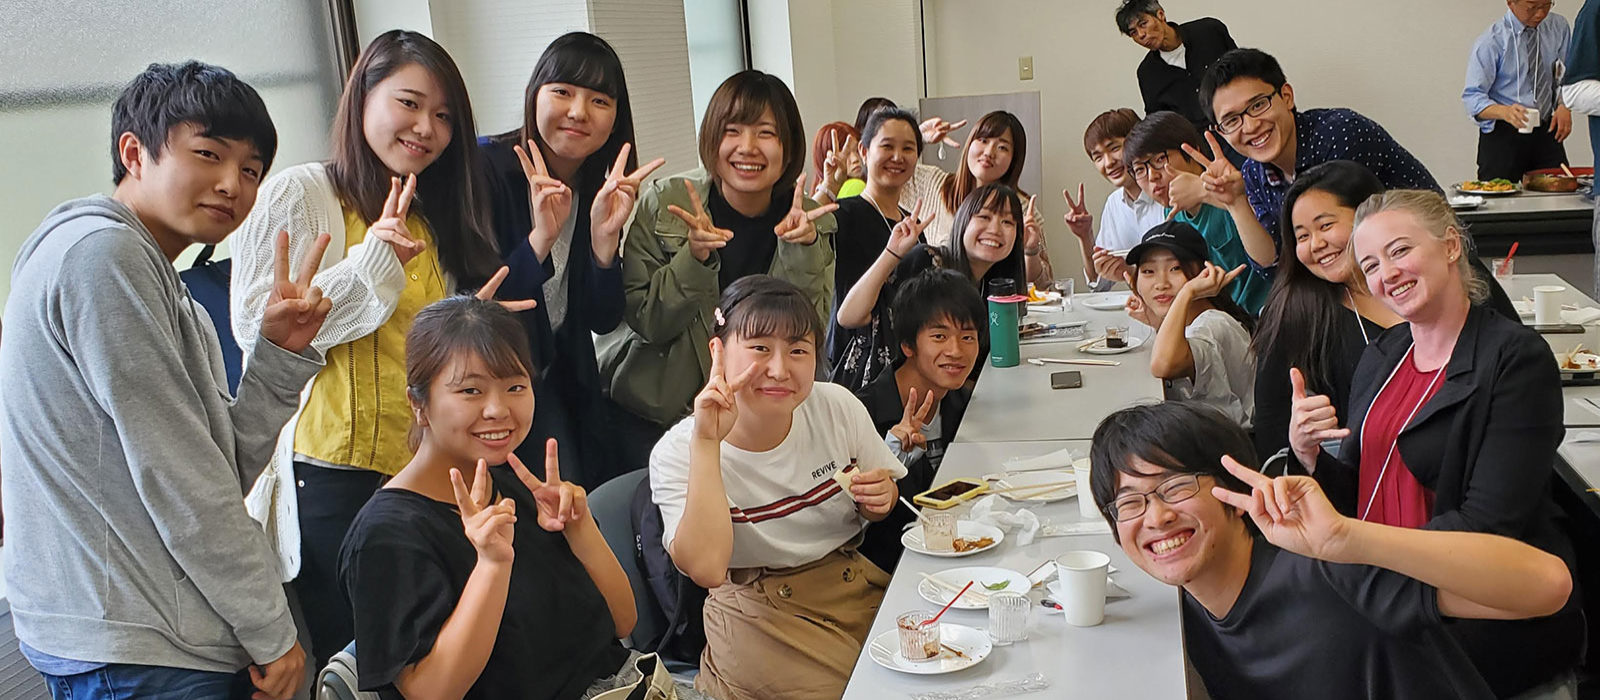 Students eating together